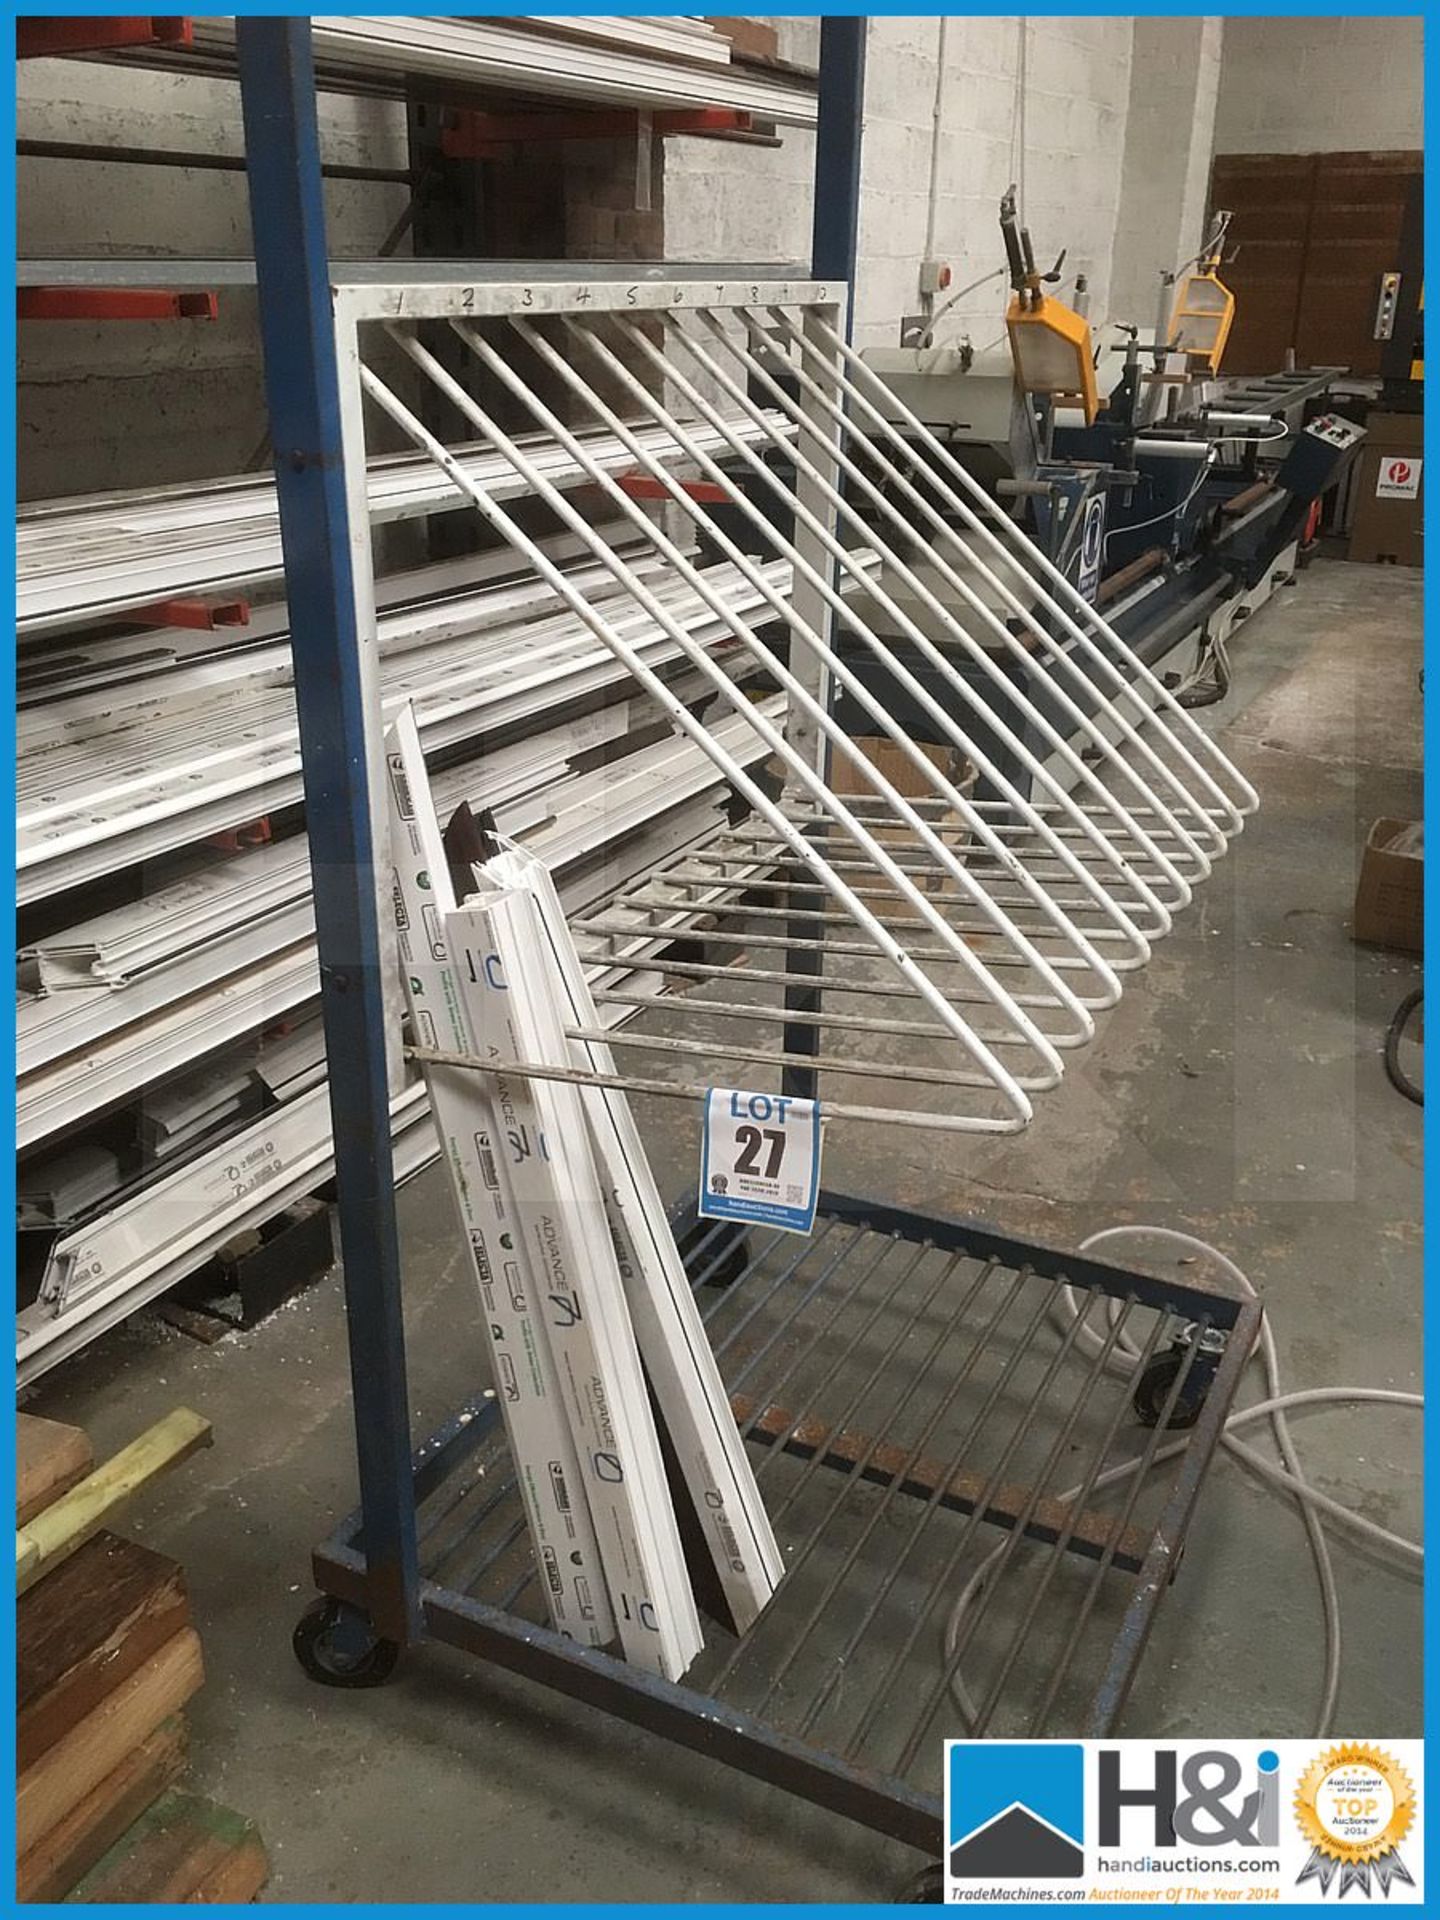 Free standing postable stock rack. NOTES: Please see the T&Cs & Important Info tab above for